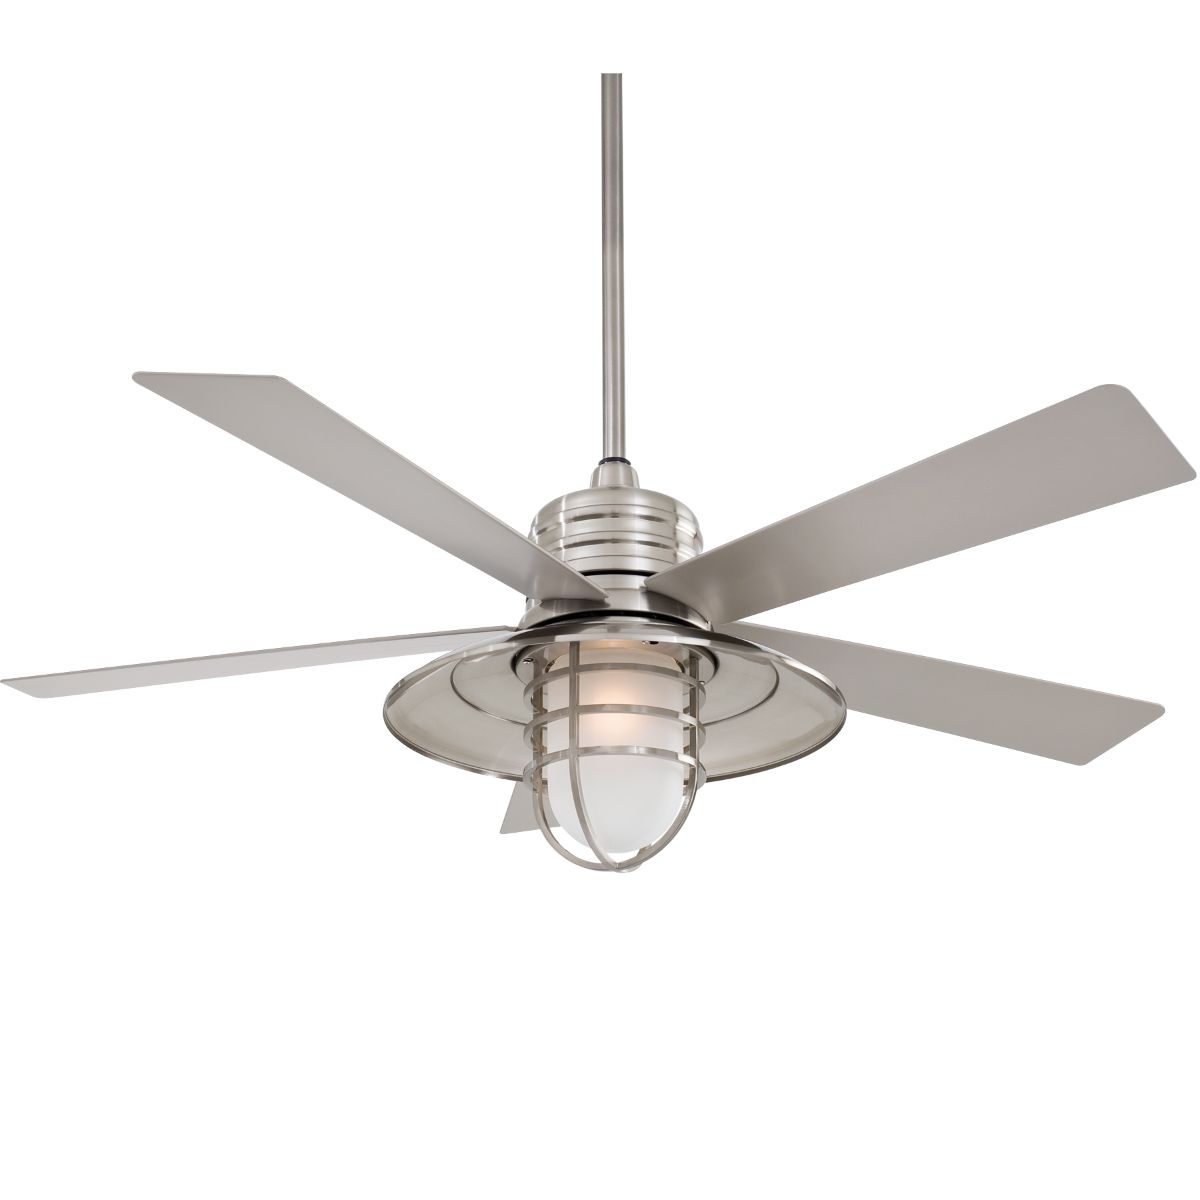 Rainman 54 Inch Contemporary Outdoor Ceiling Fan With Light, Wall Control Included